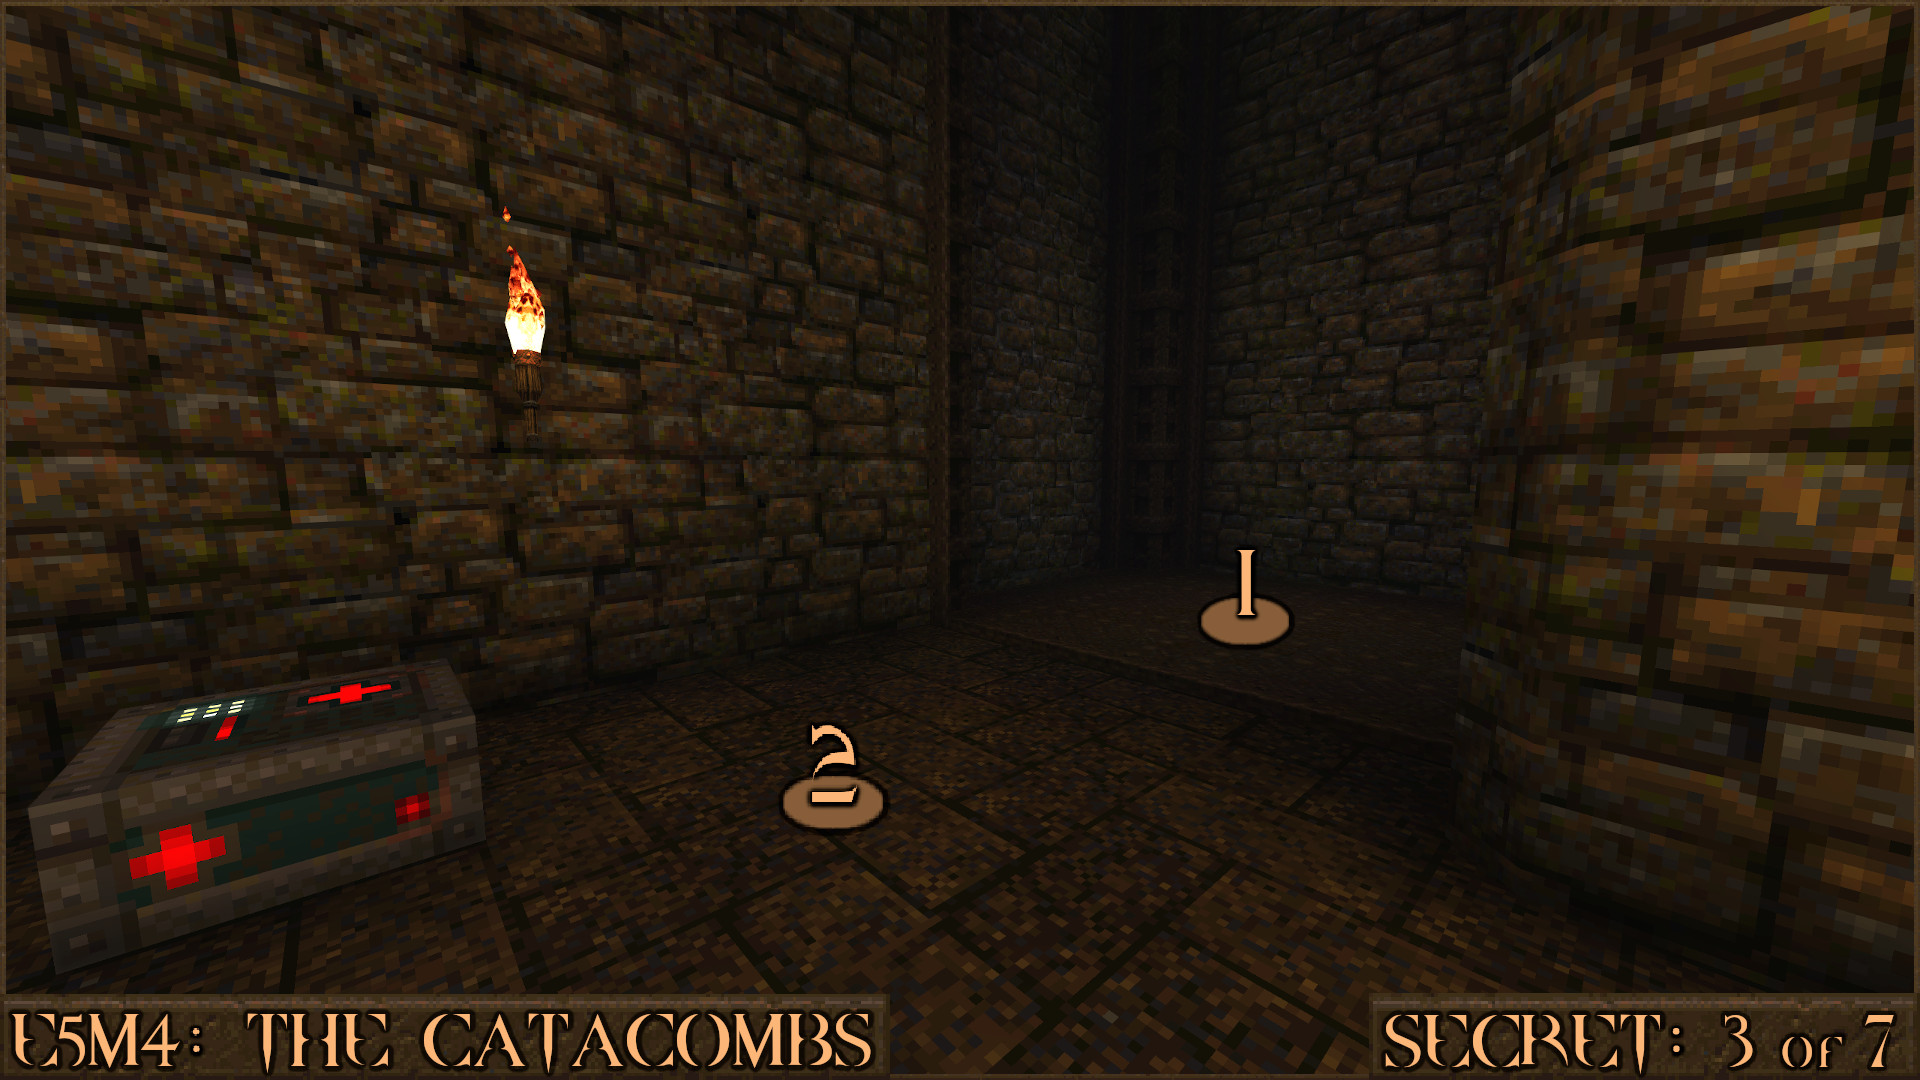 Quake Finding All Secrets in Quake Expansion pack: Dimension of the Past - E5M4: The Catacombs - CC476D8